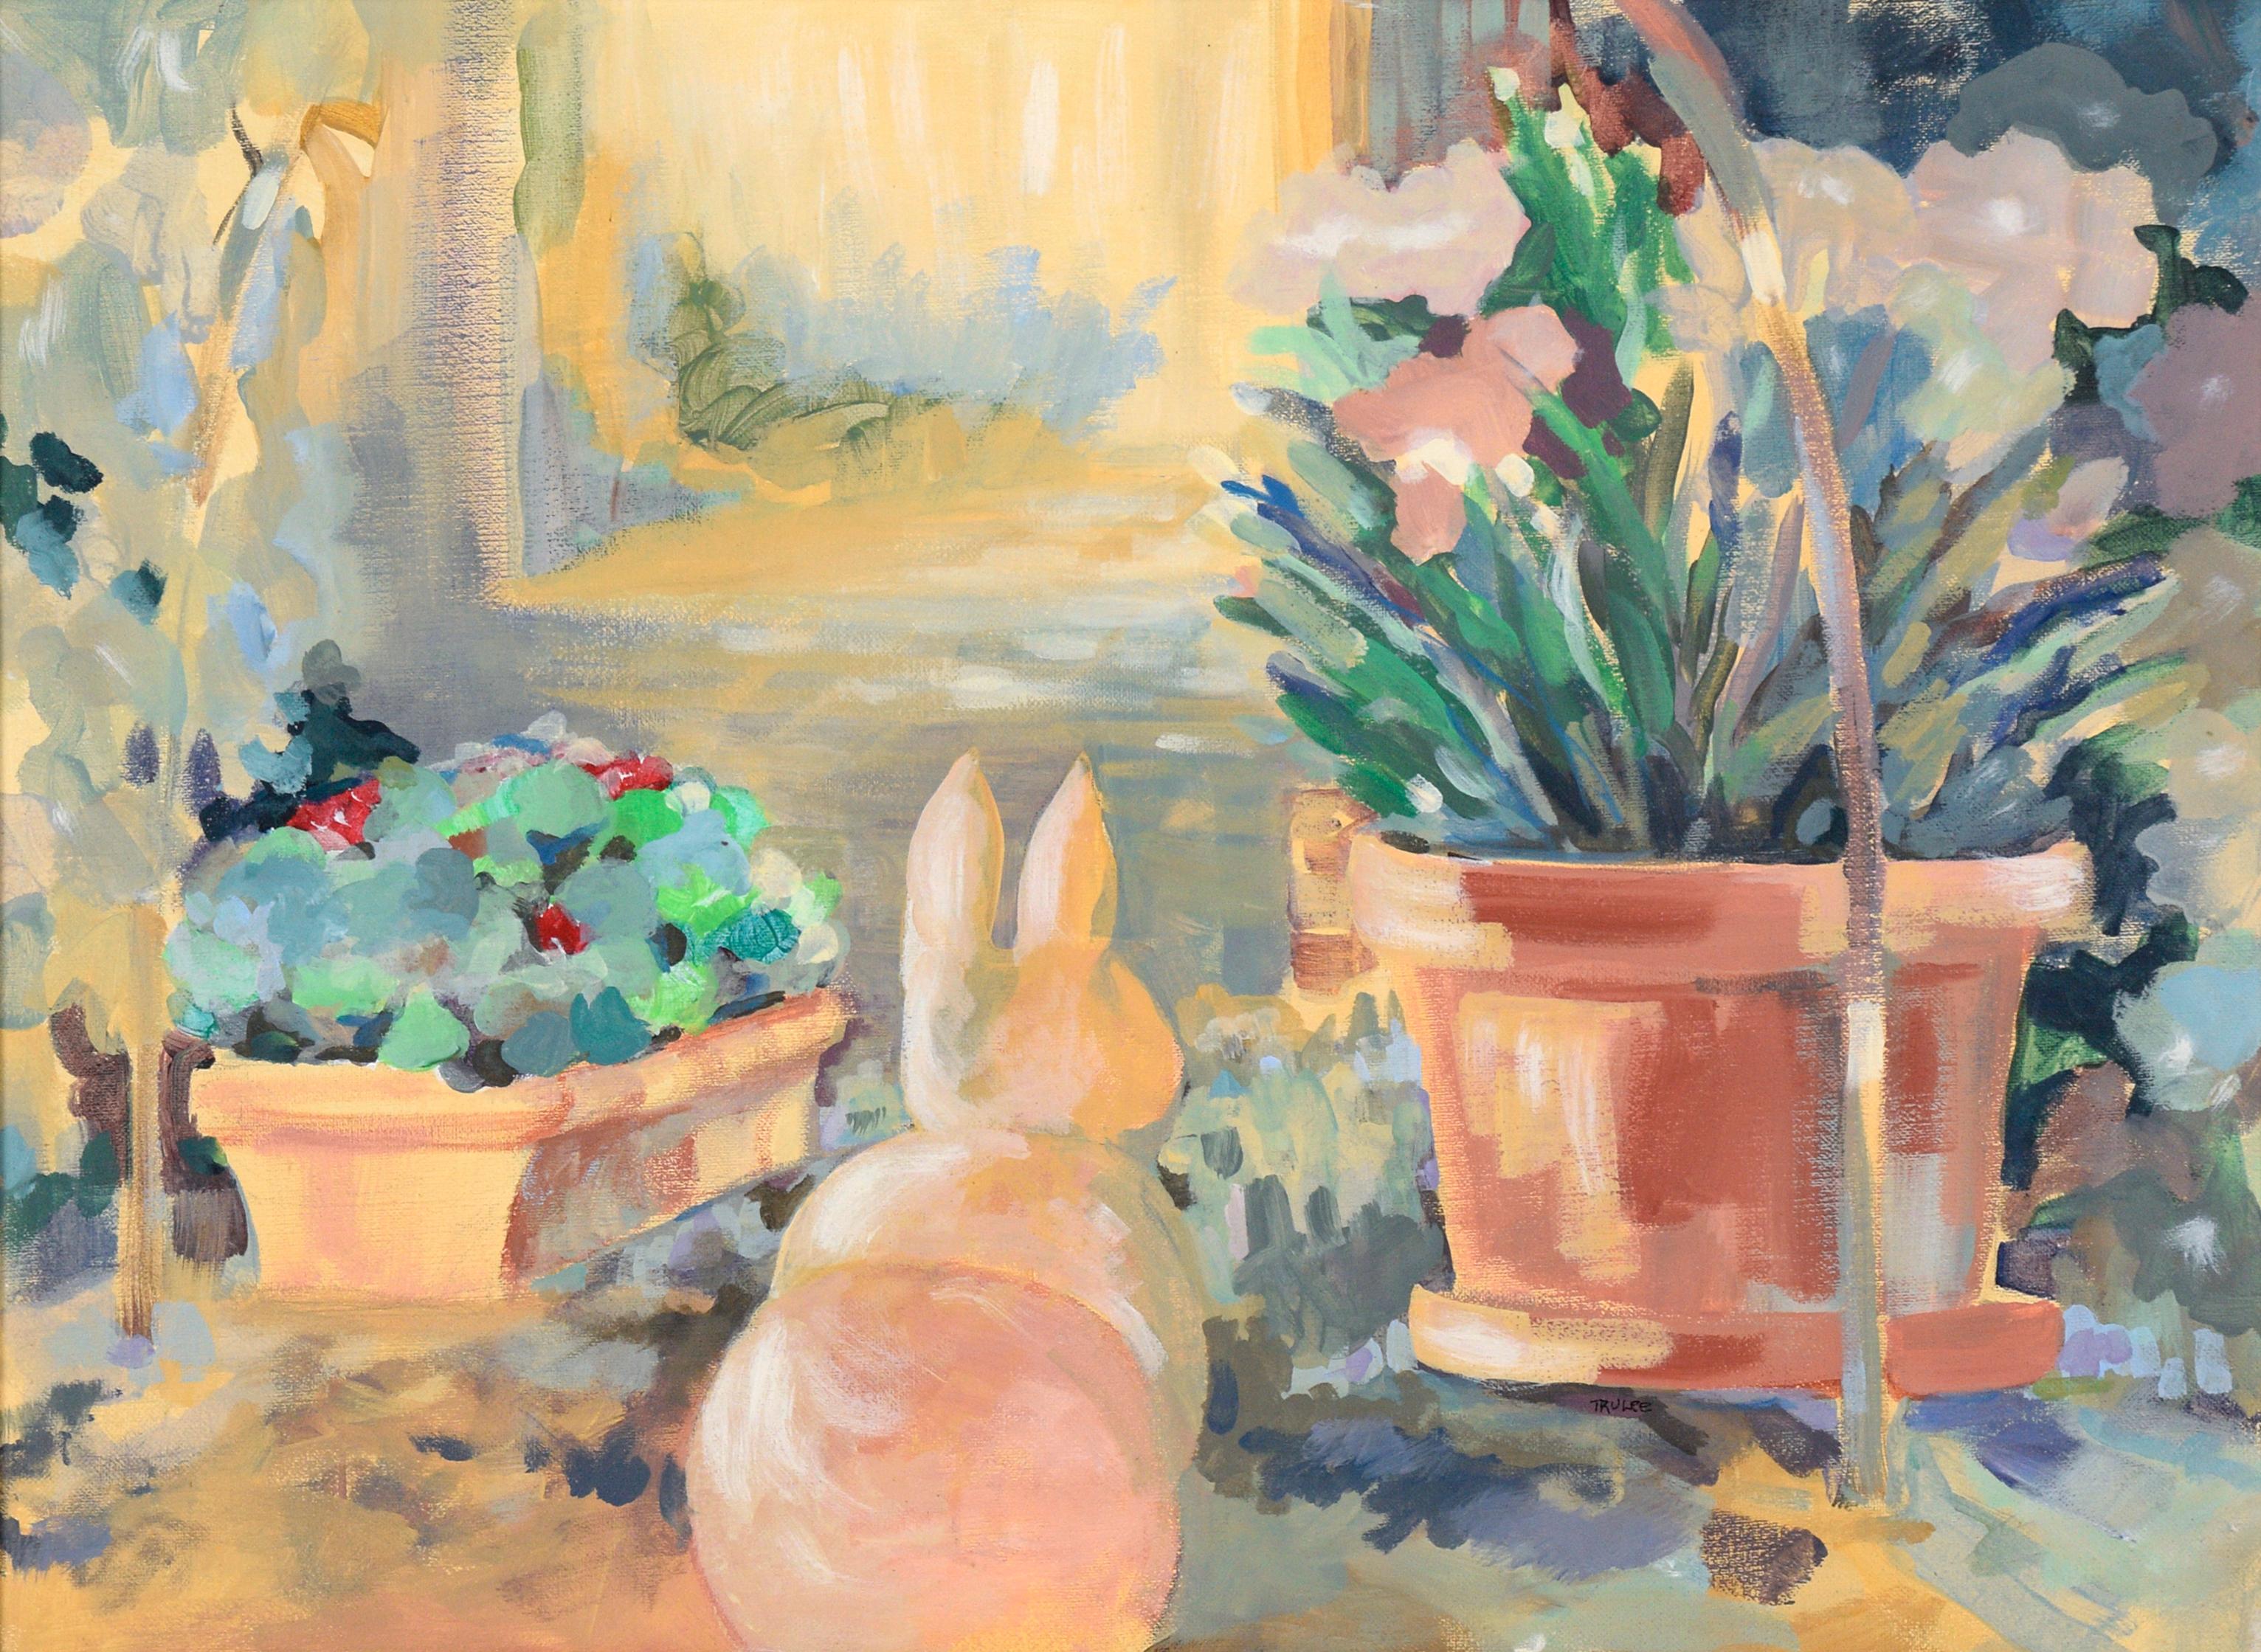 Rabbit Sculpture in the Garden - Acrylic on Canvas - Painting by Truelee